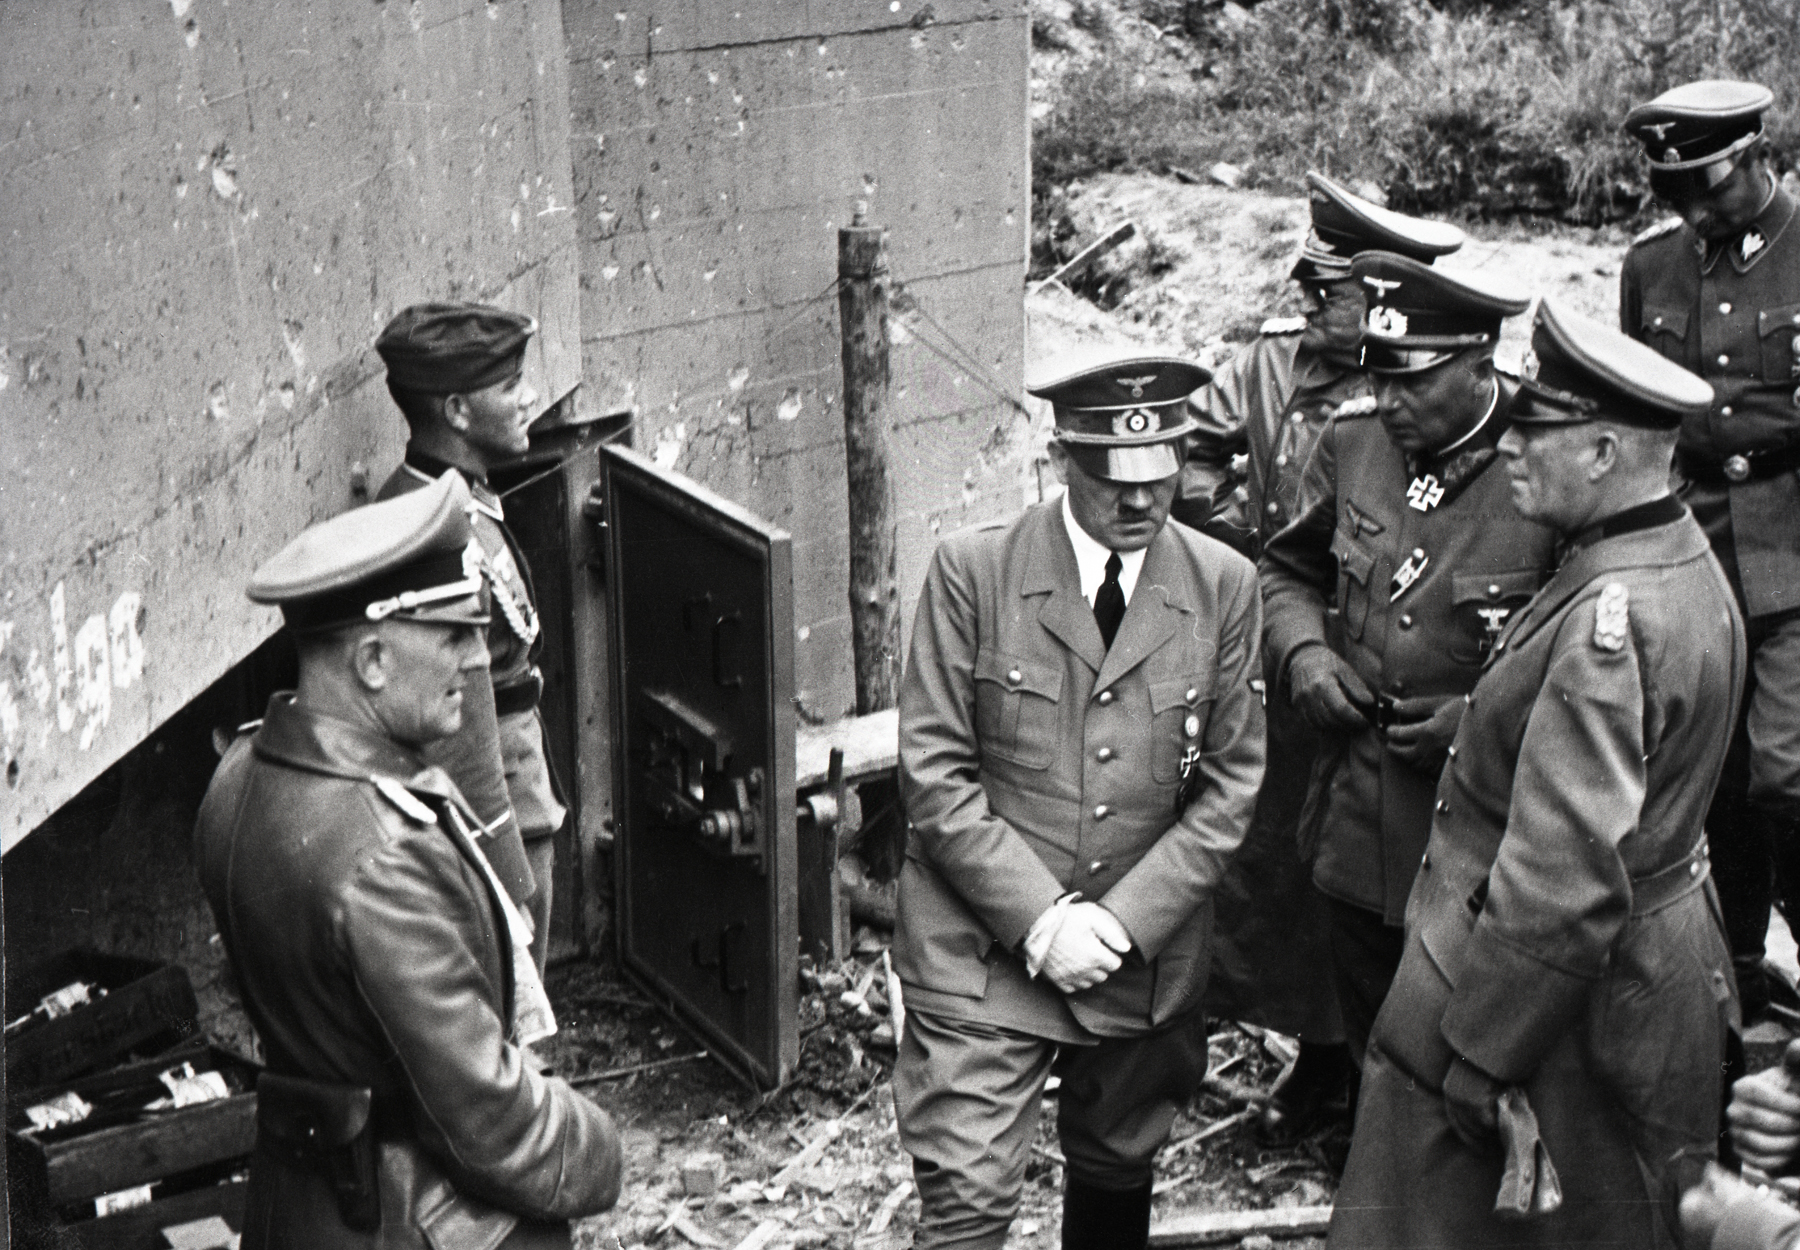 Adolf Hitler visits a German bunker from WWI, from Eva Braun's albums